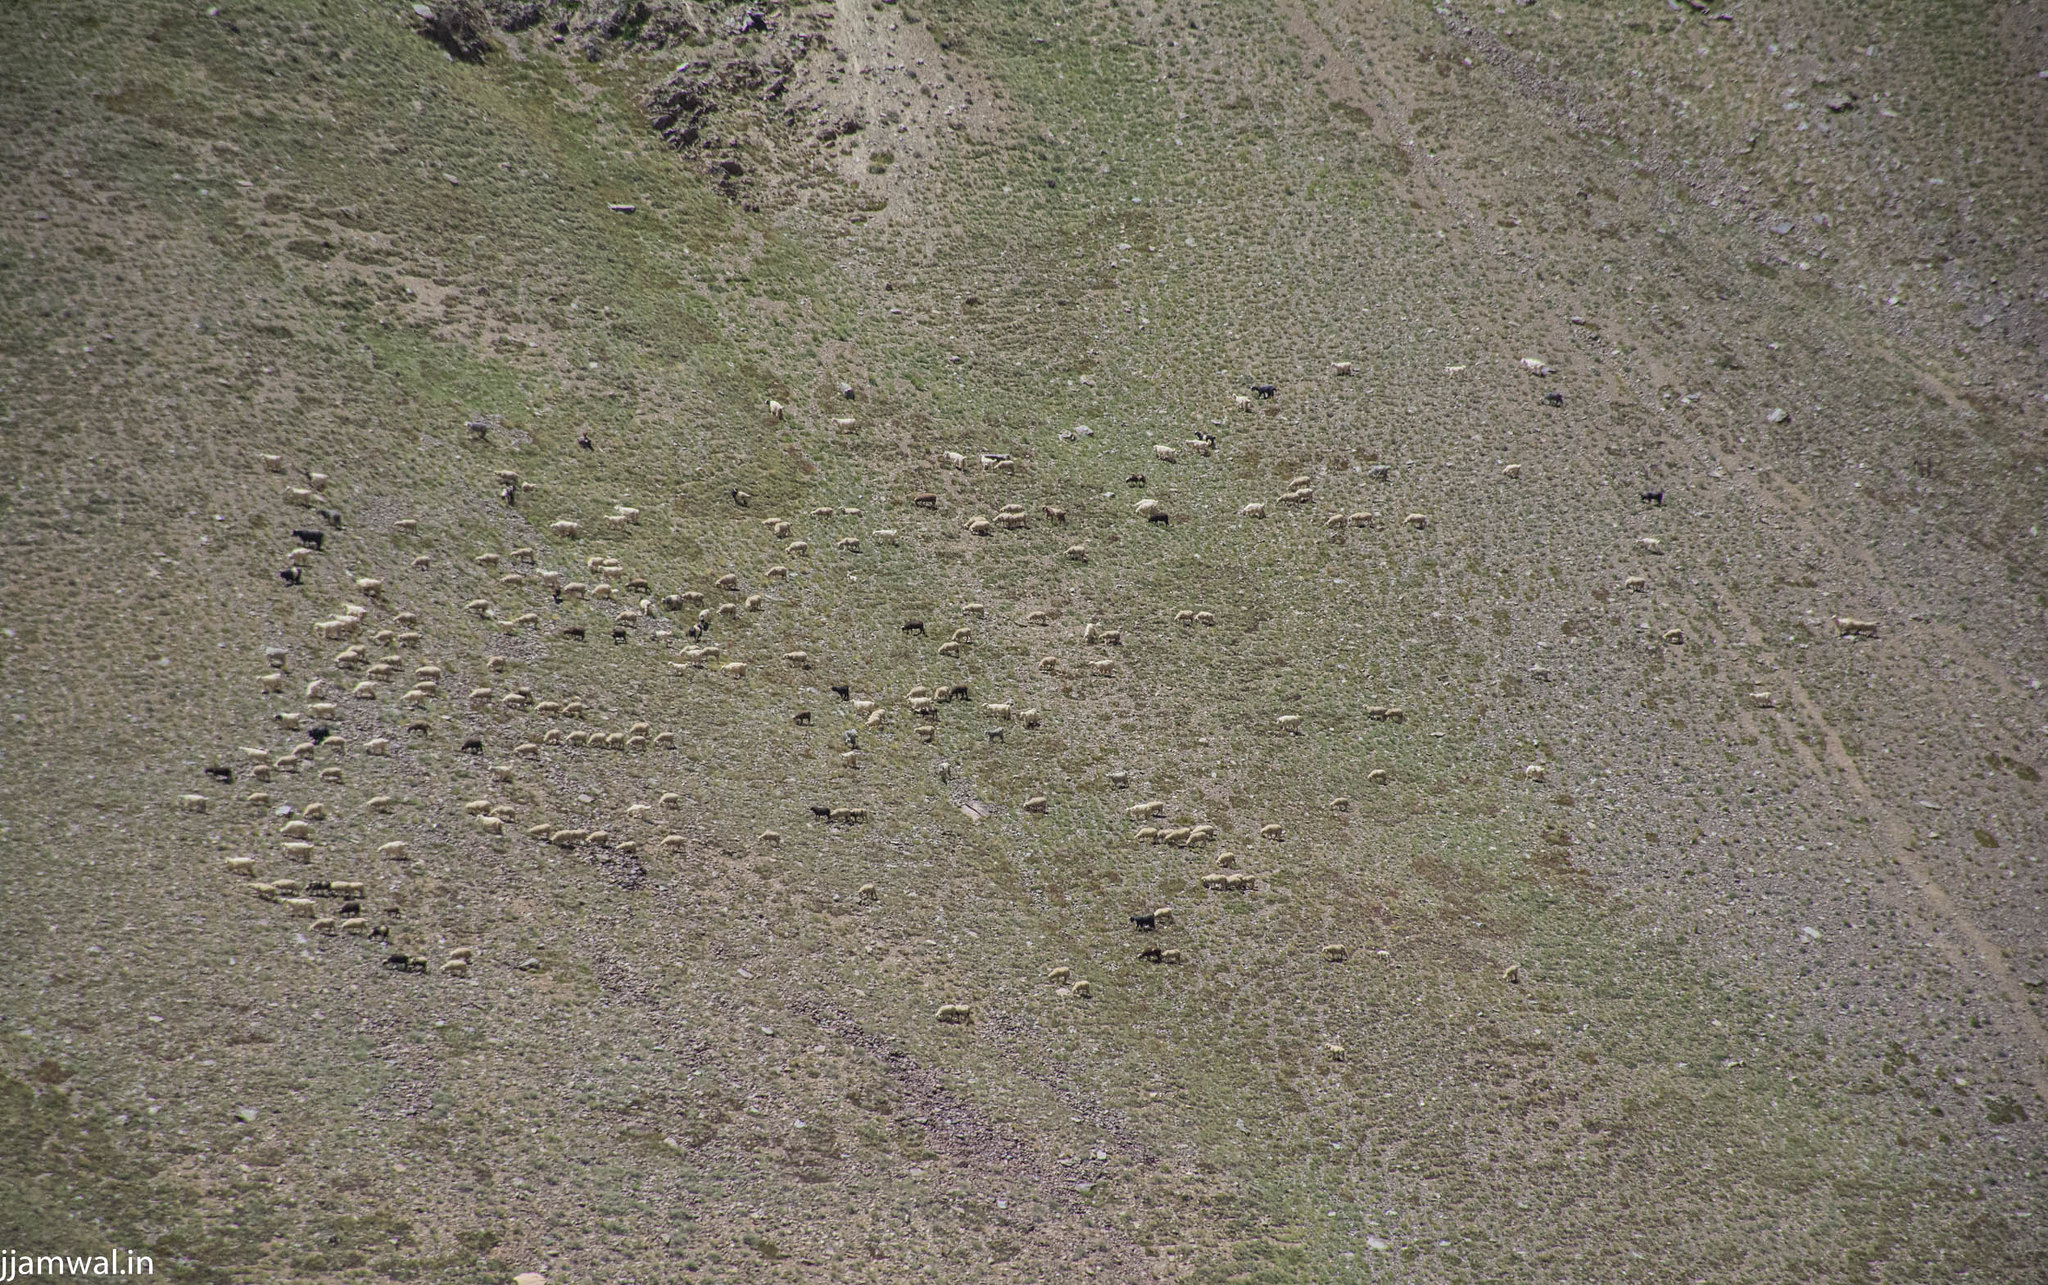 Sheep and goats grazing on a nearby mountain